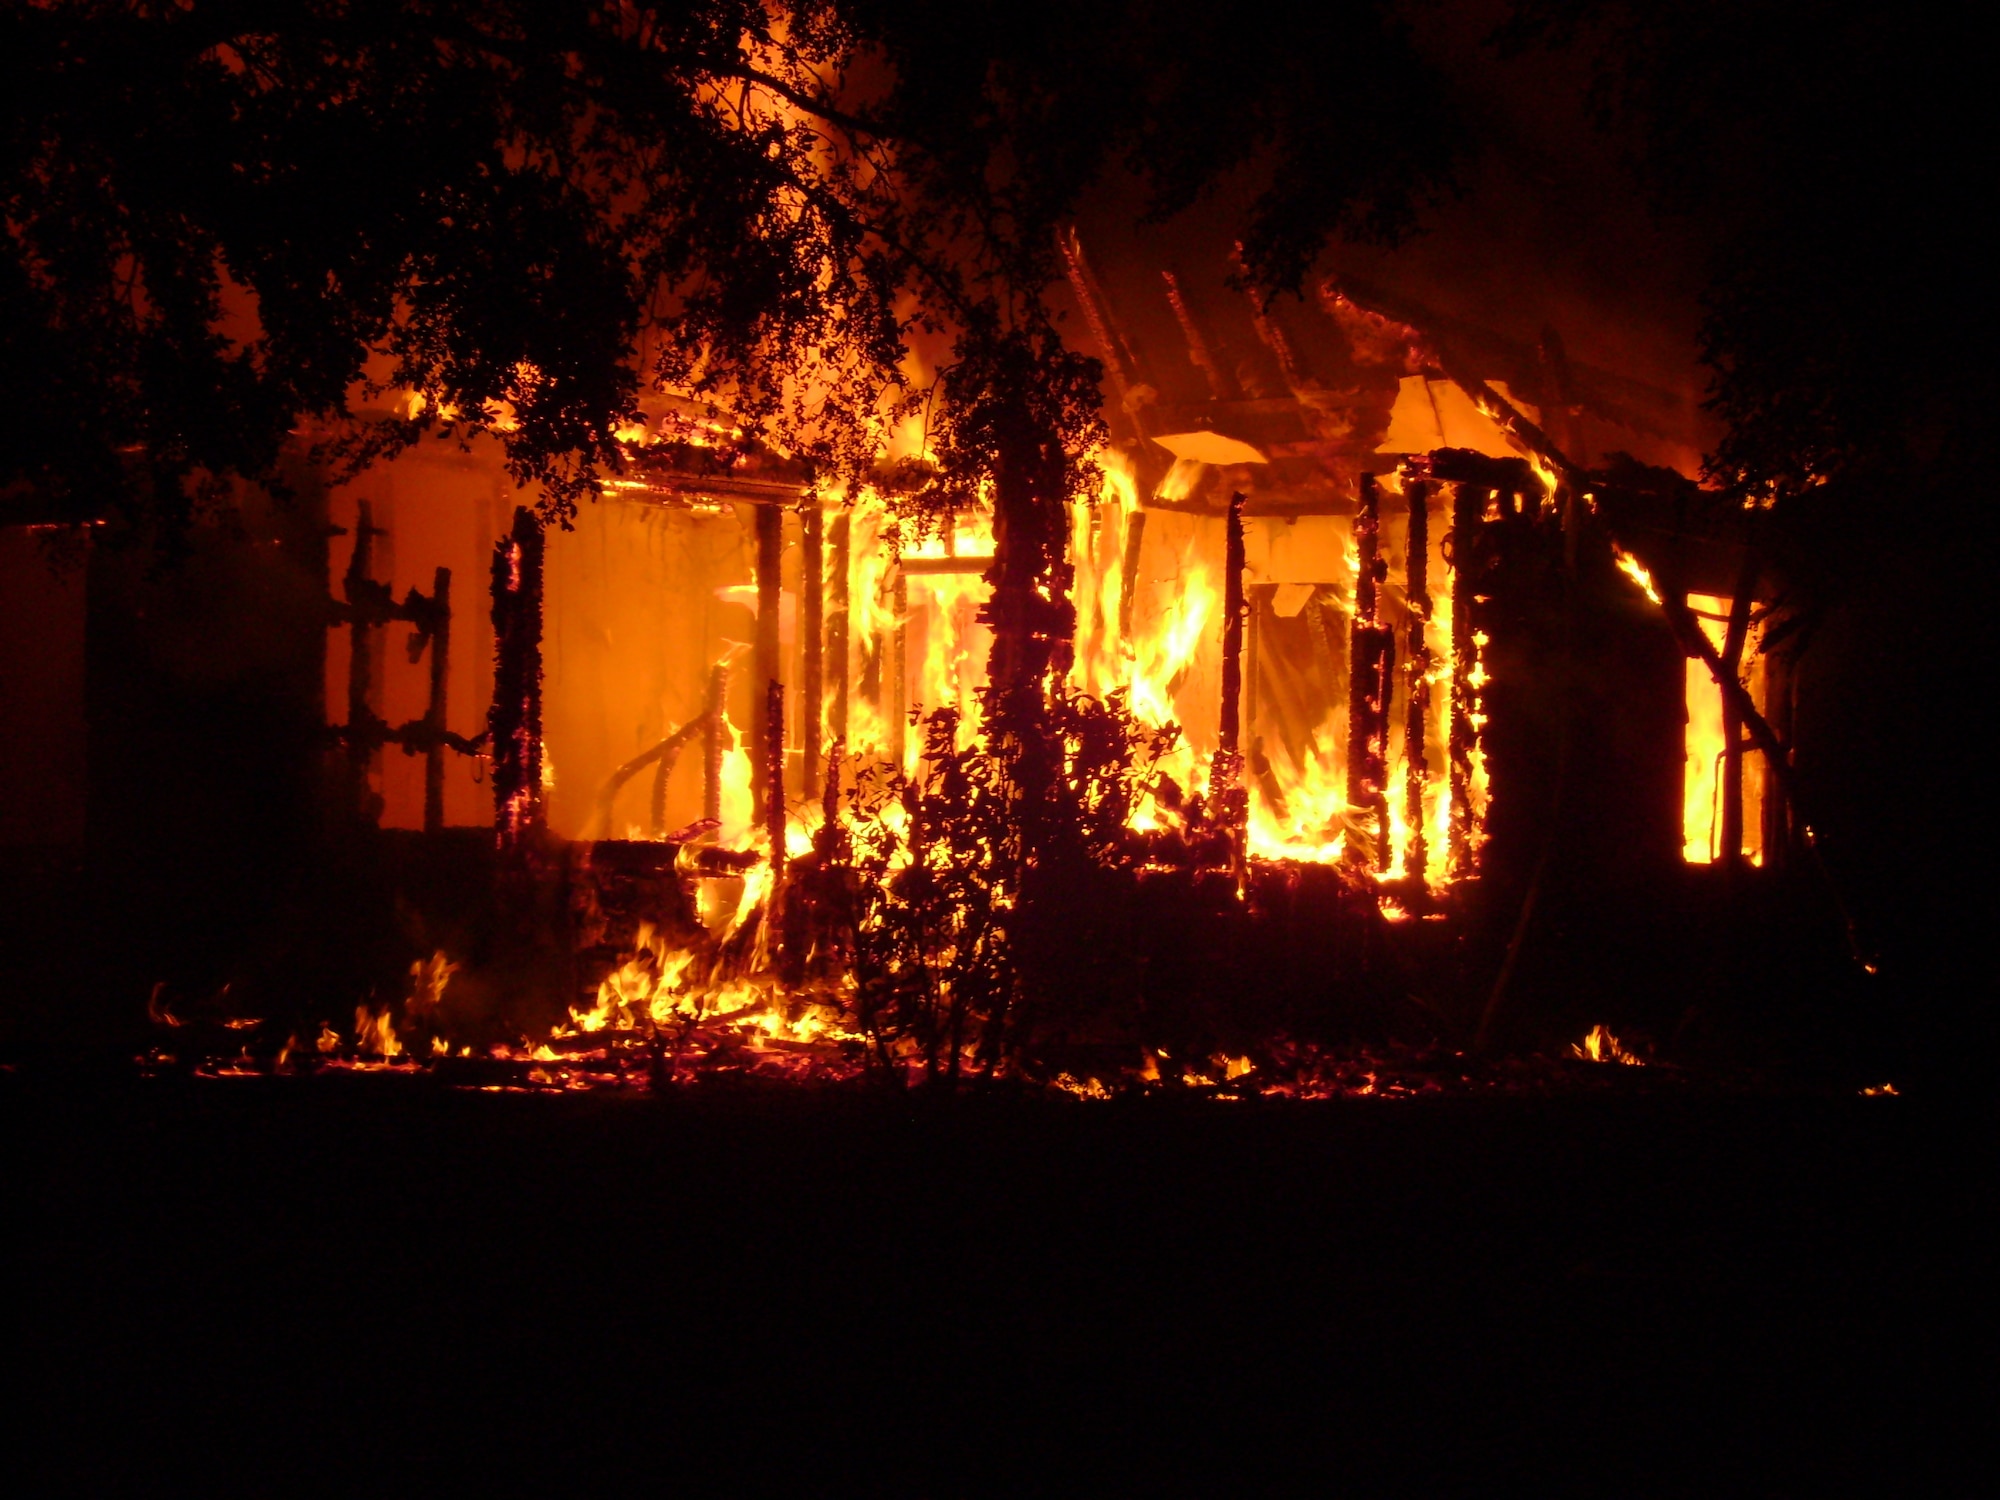 The infrastructure of a home in Wherry Housing crumbles under a fiery onslaught Aug. 14.  No one was inside the house, and none of the responders were injured.  (U.S. Air Force photo)                            